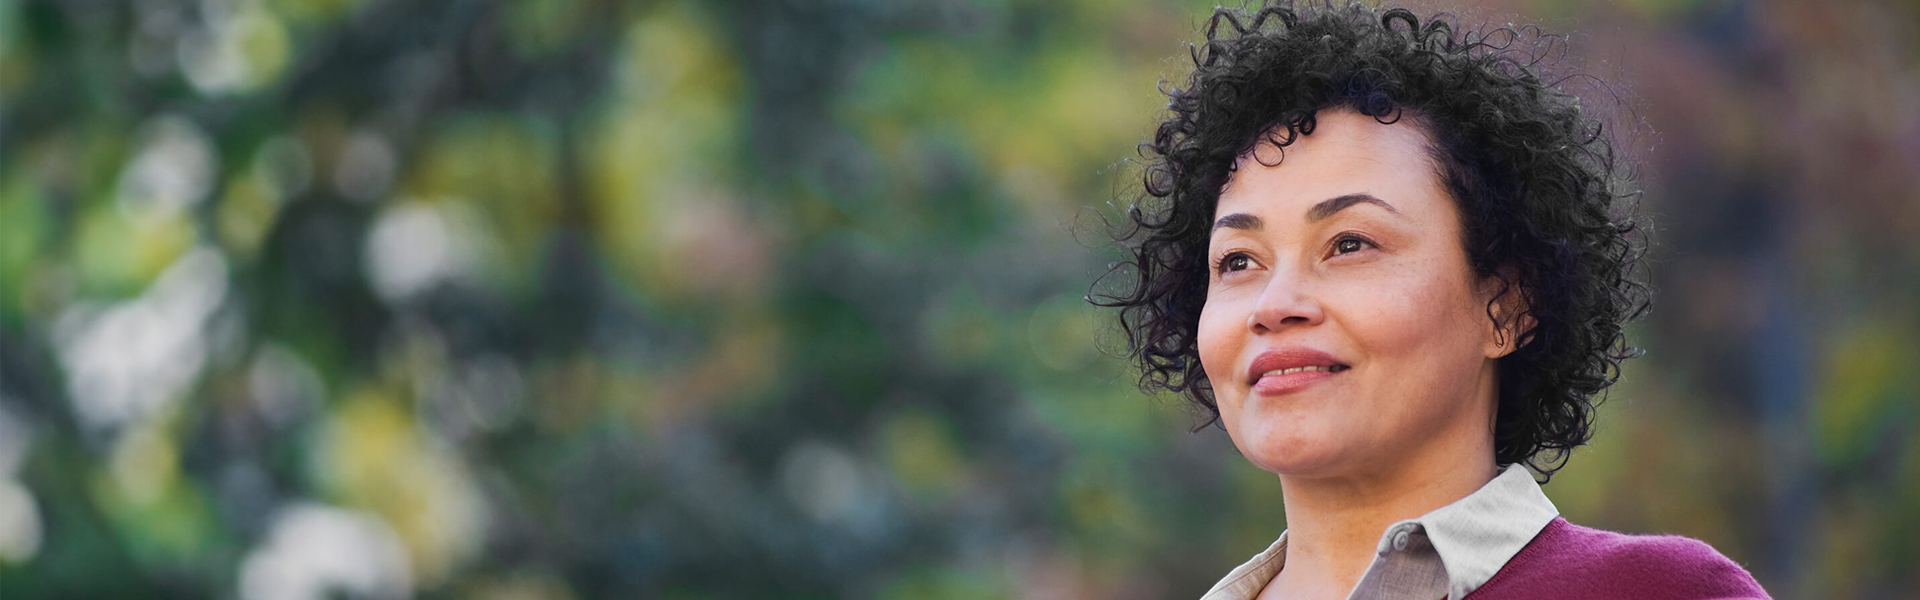 smiling woman with short curly hair looking into the distance